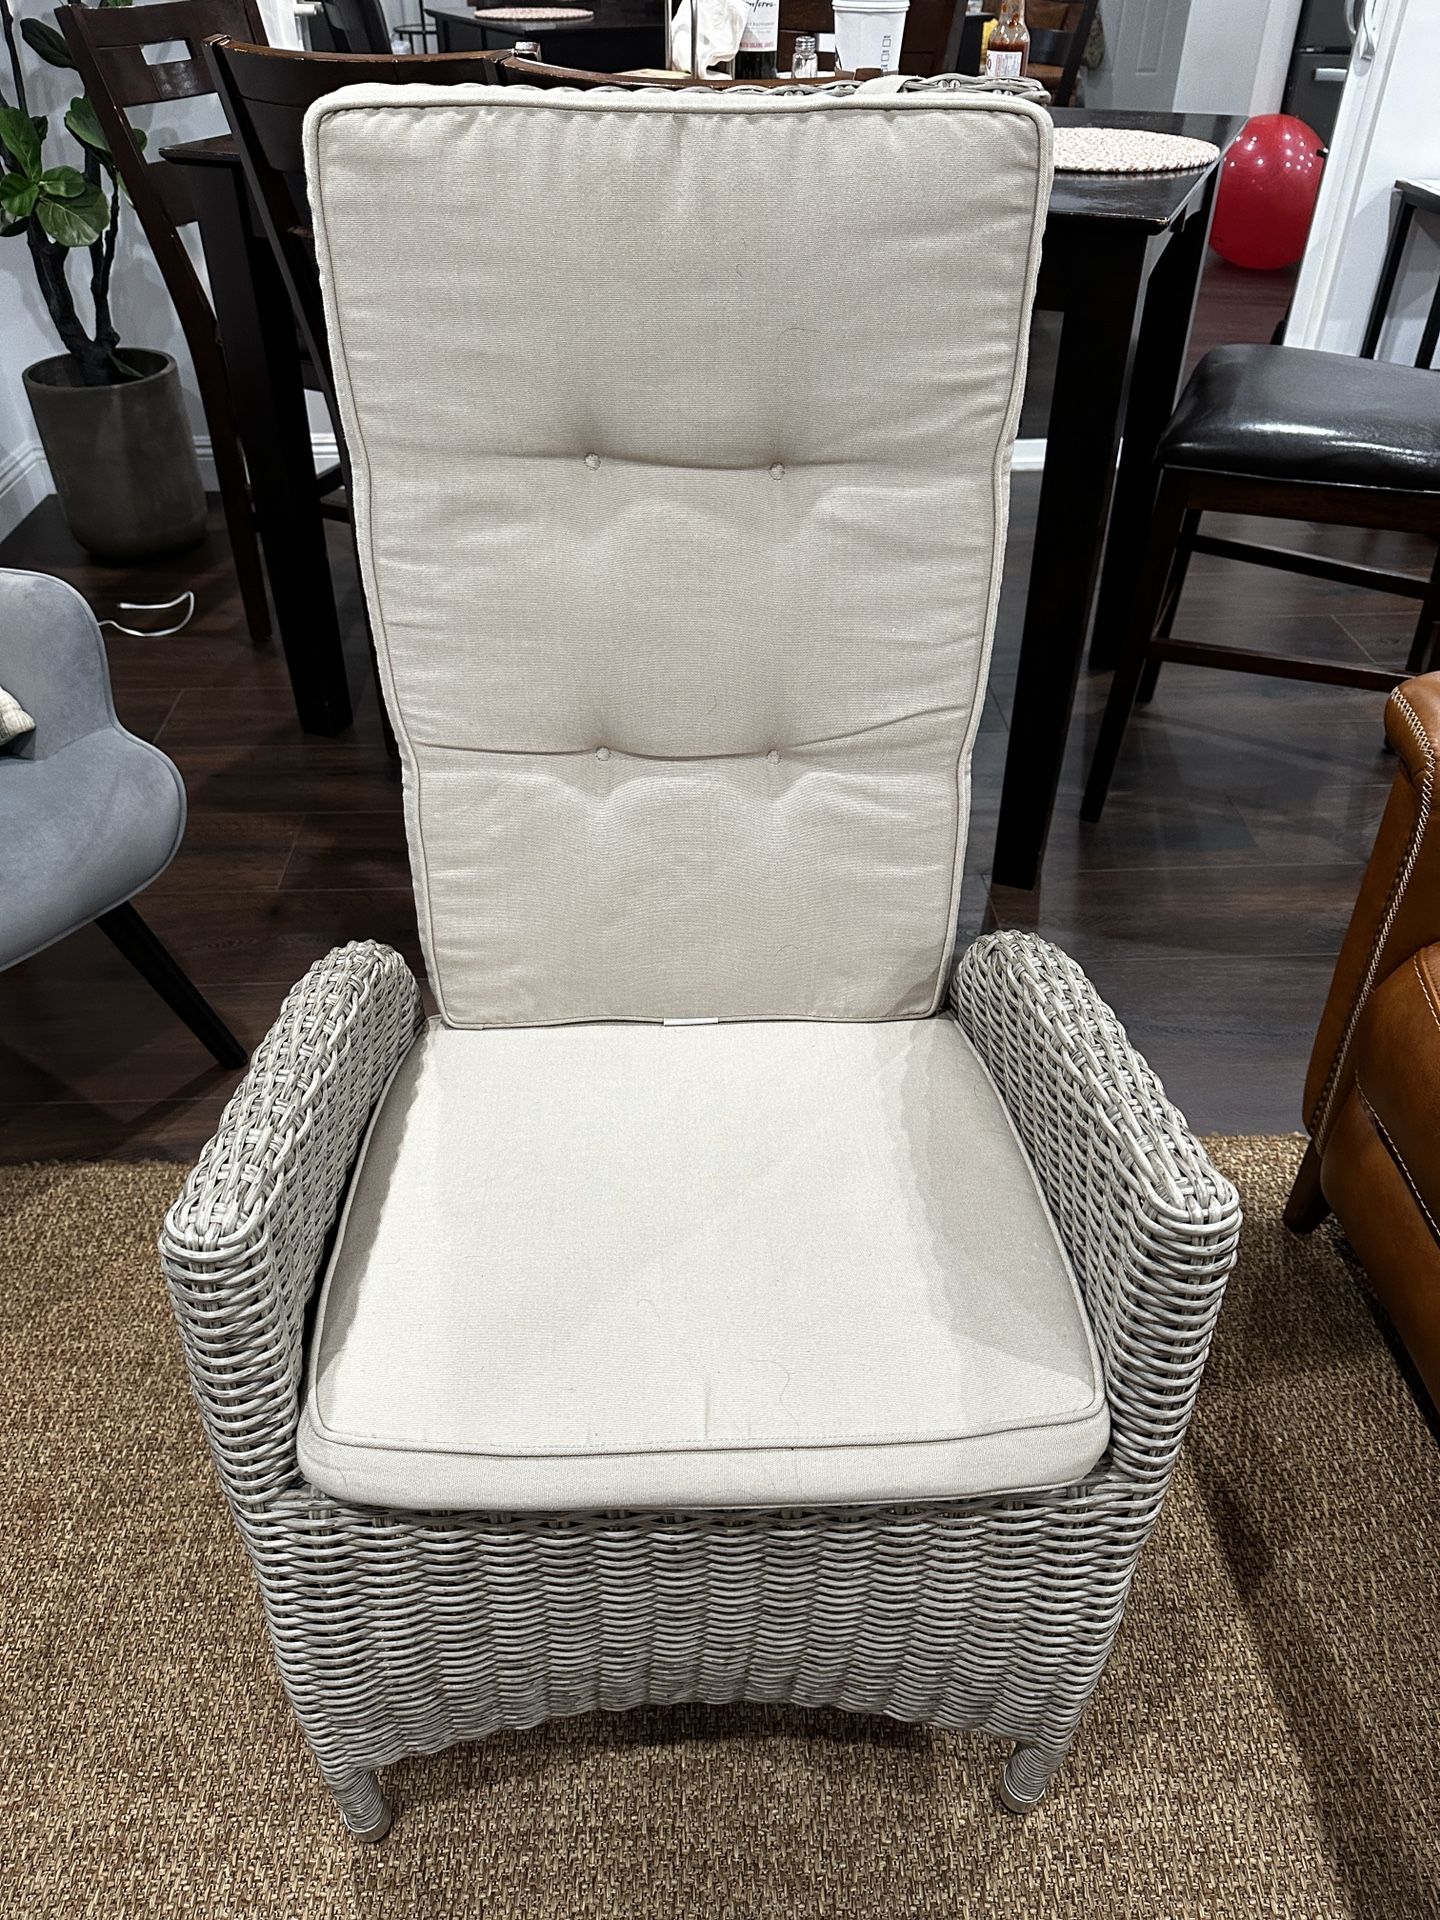 Broyhill Chair That Reclines 